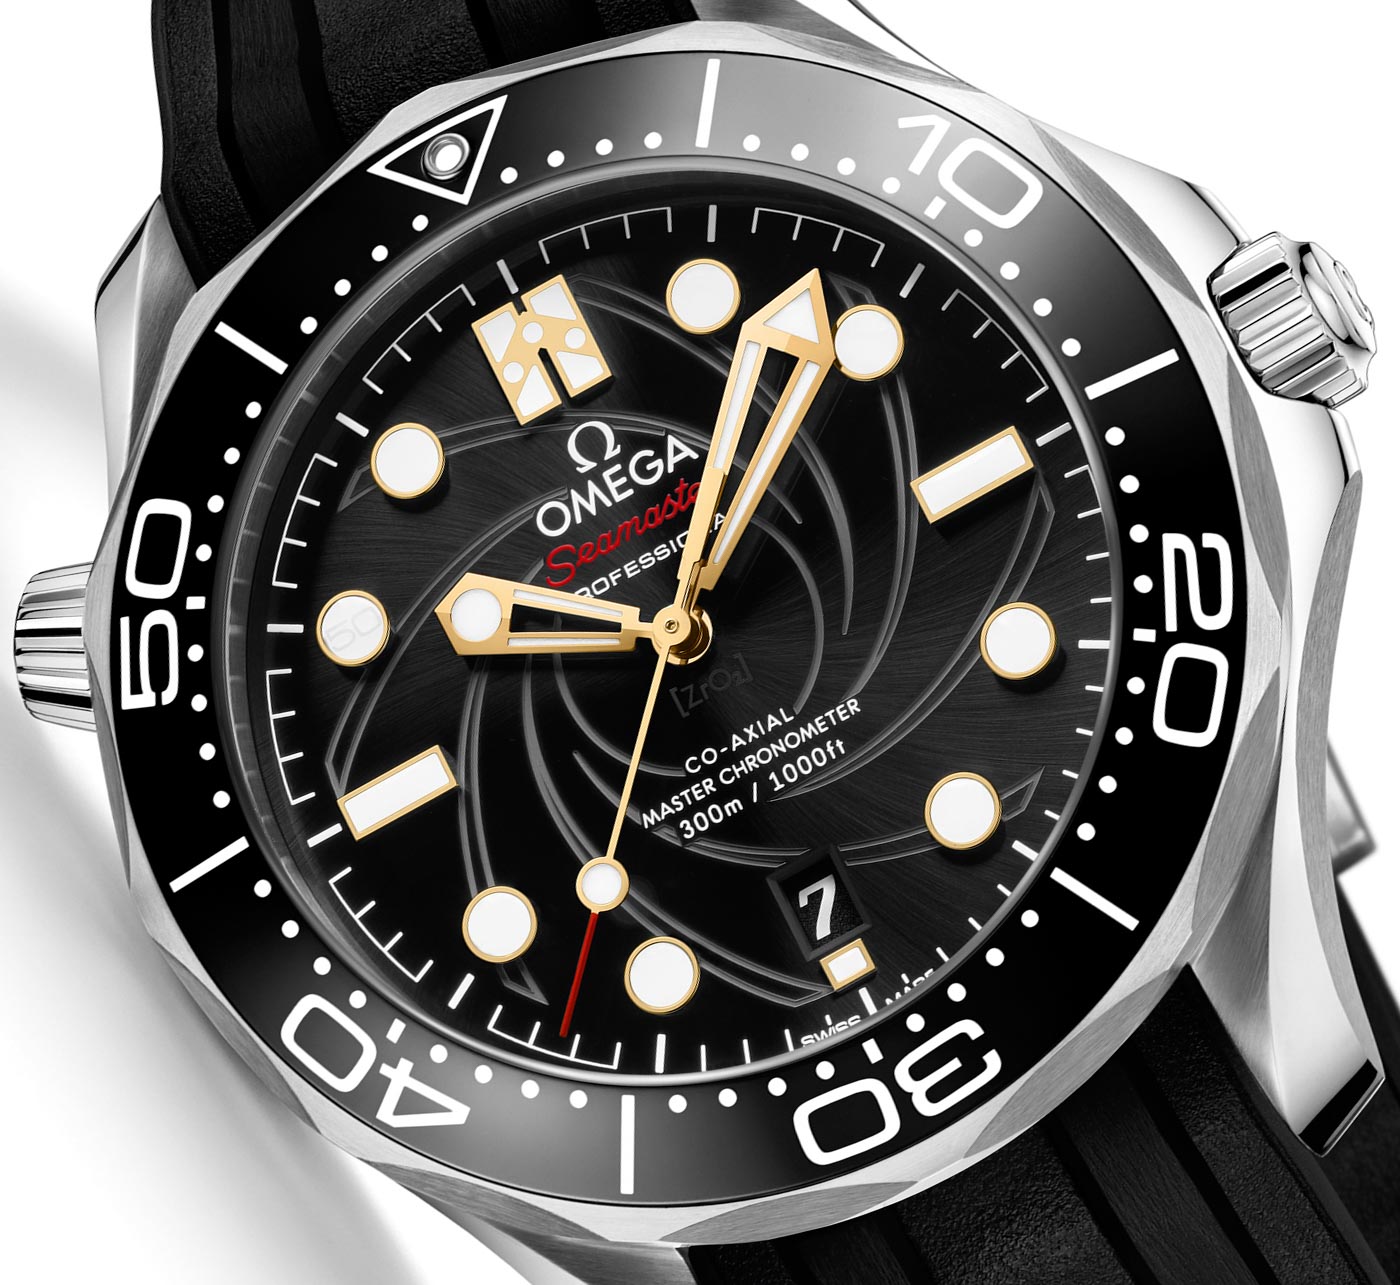 Omega Replica Seamaster Olympic Games Watch Collection For 2018 Hands ...